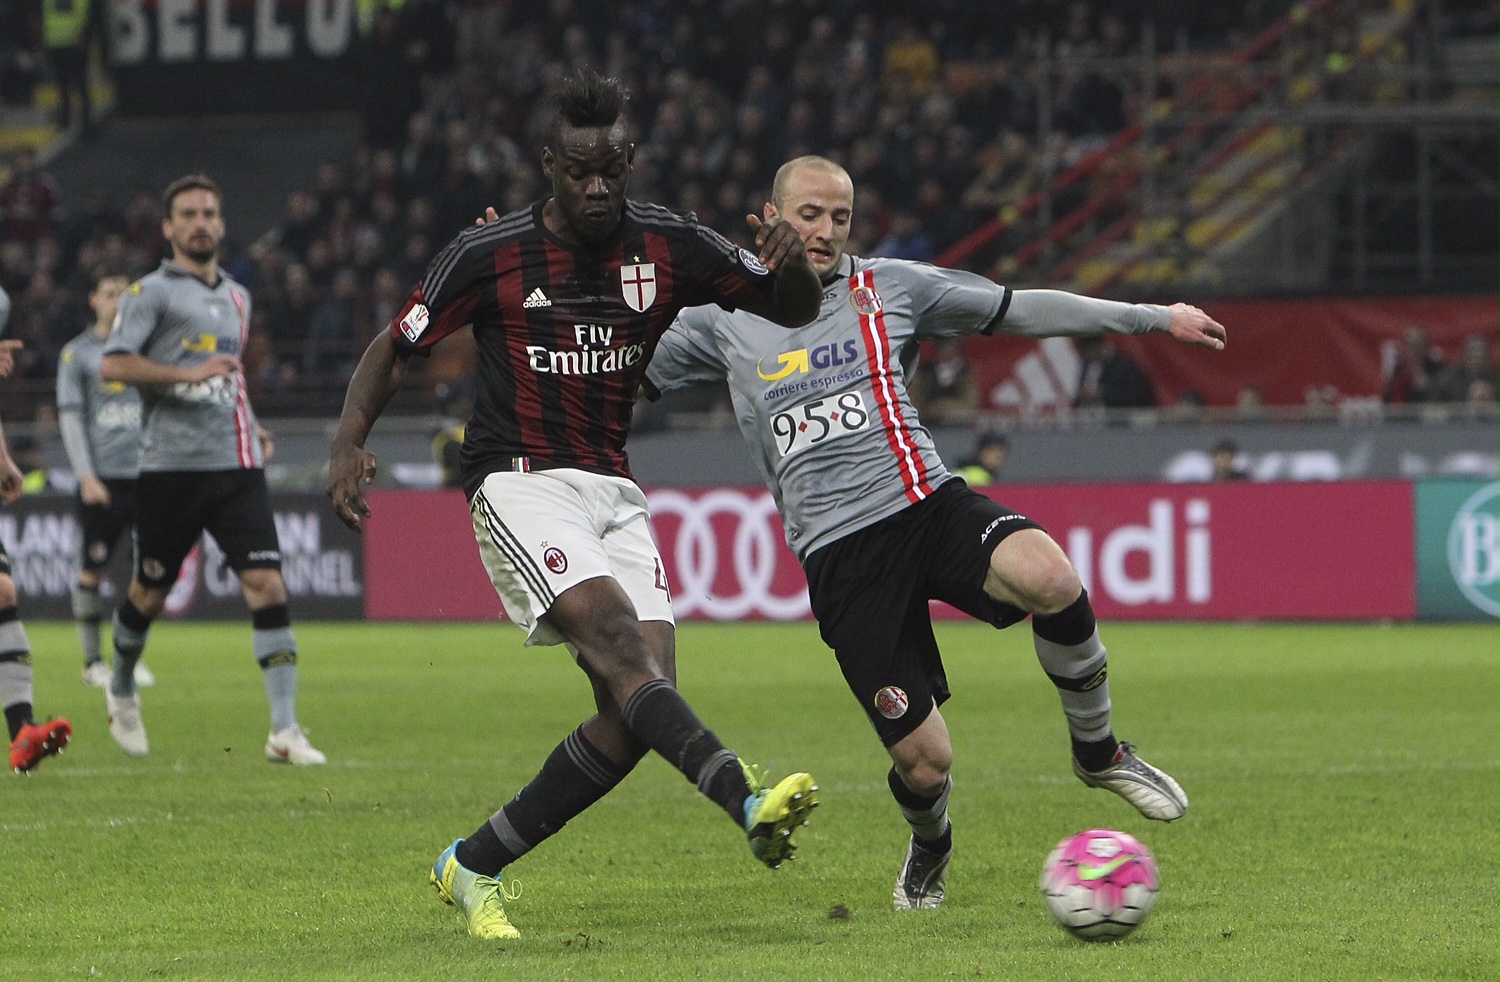 MILAN, ITALY - MARCH 01: Mario Balotelli (L) of AC Milan scores his goal during the TIM Cup match between AC Milan and US Alessandria at Stadio Giuseppe Meazza on March 1, 2016 in Milan, Italy. (Photo by Marco Luzzani/Getty Images)